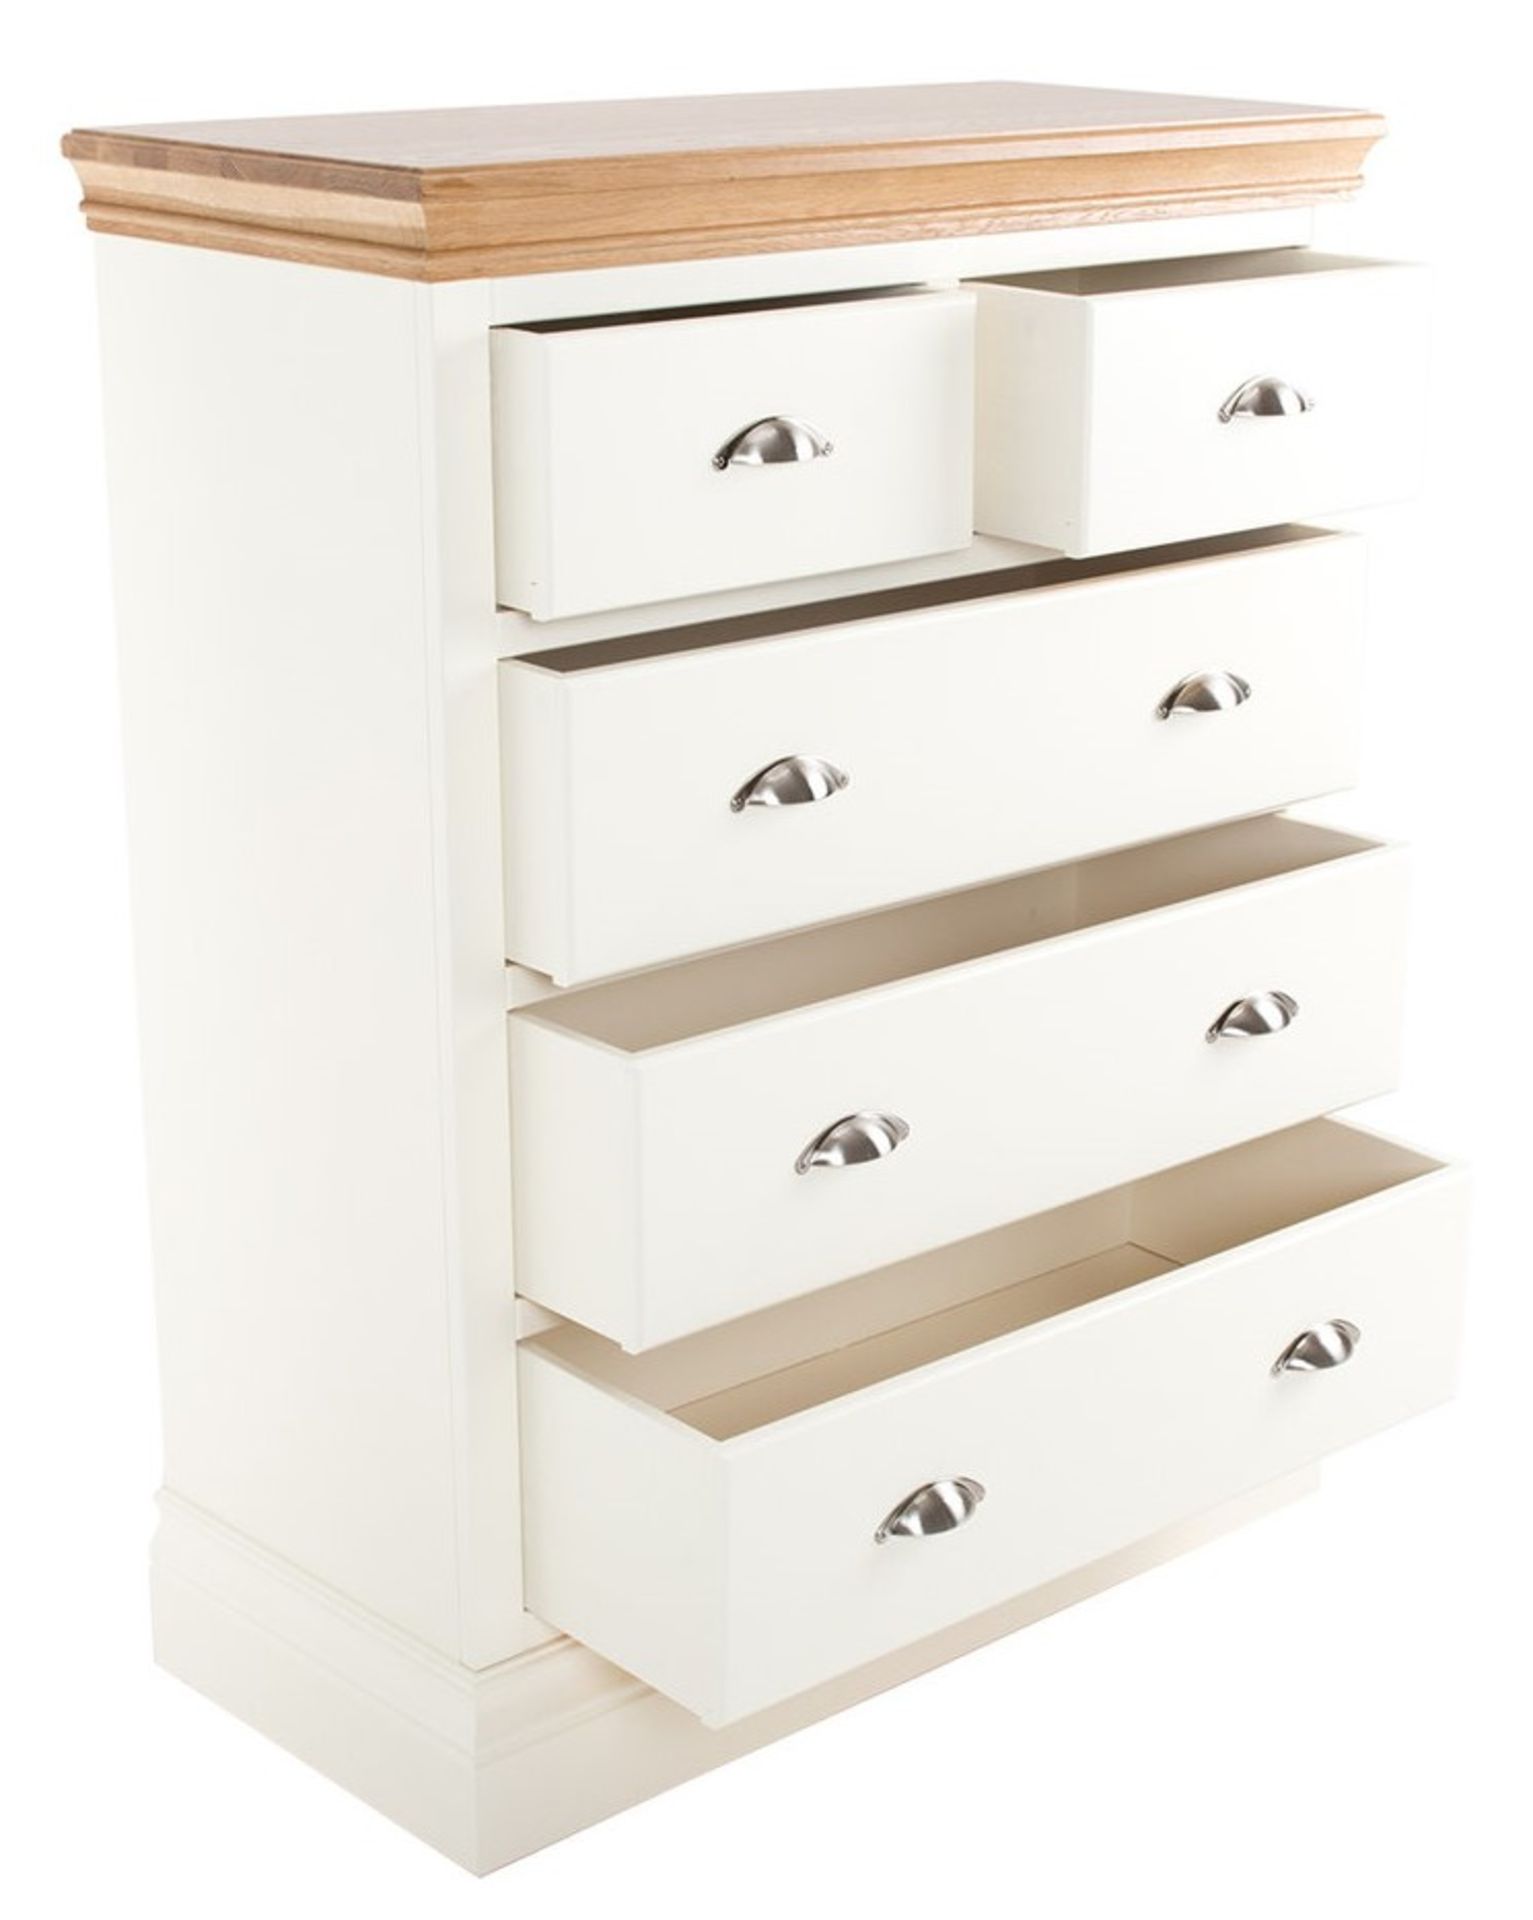 1 x Clement 3+2 Chest of Bedroom Drawers By Brewers Home - Solid Wood Painted Furniture Finished